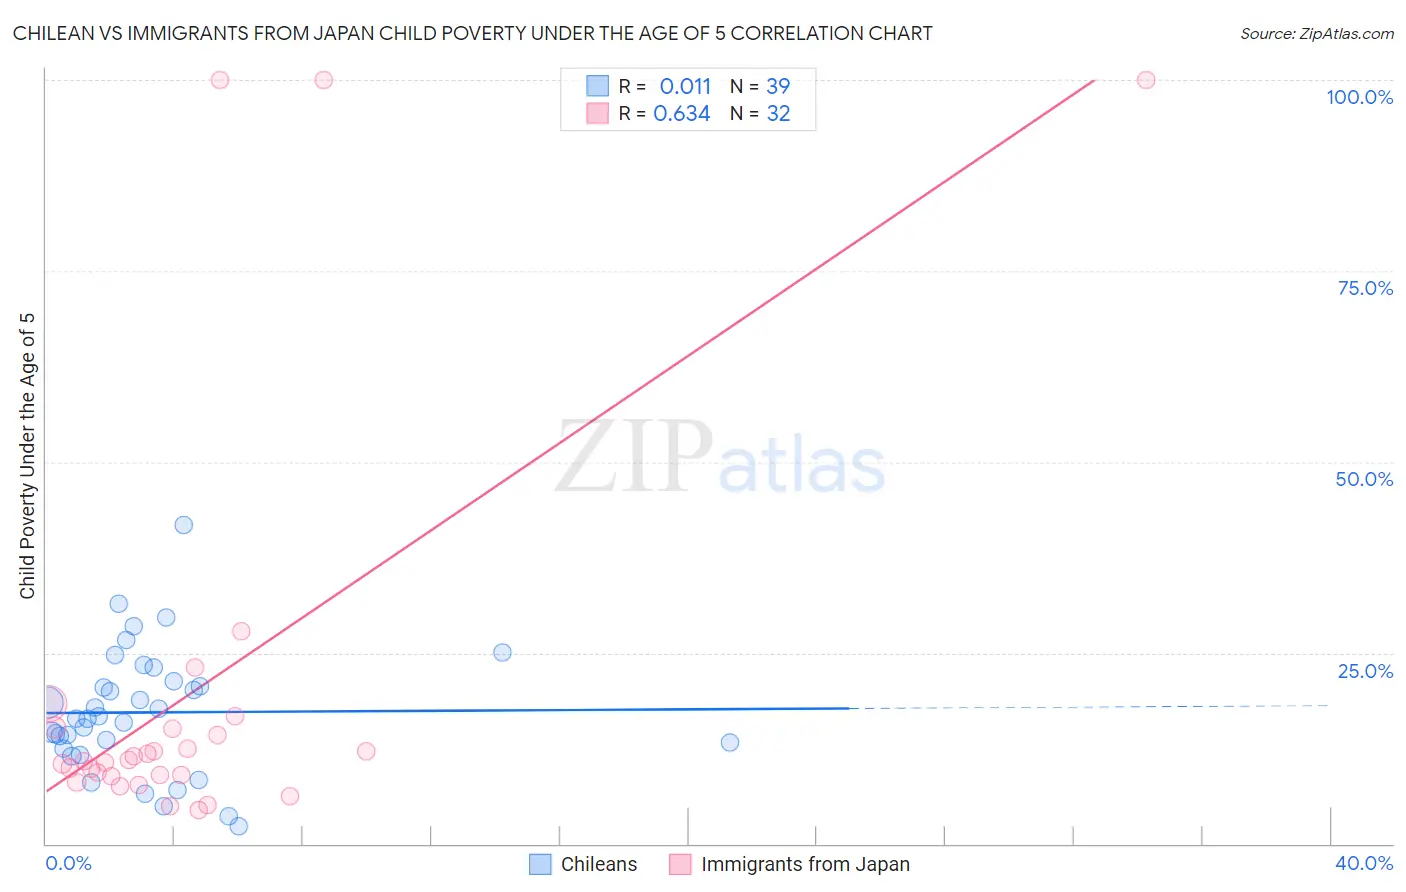 Chilean vs Immigrants from Japan Child Poverty Under the Age of 5